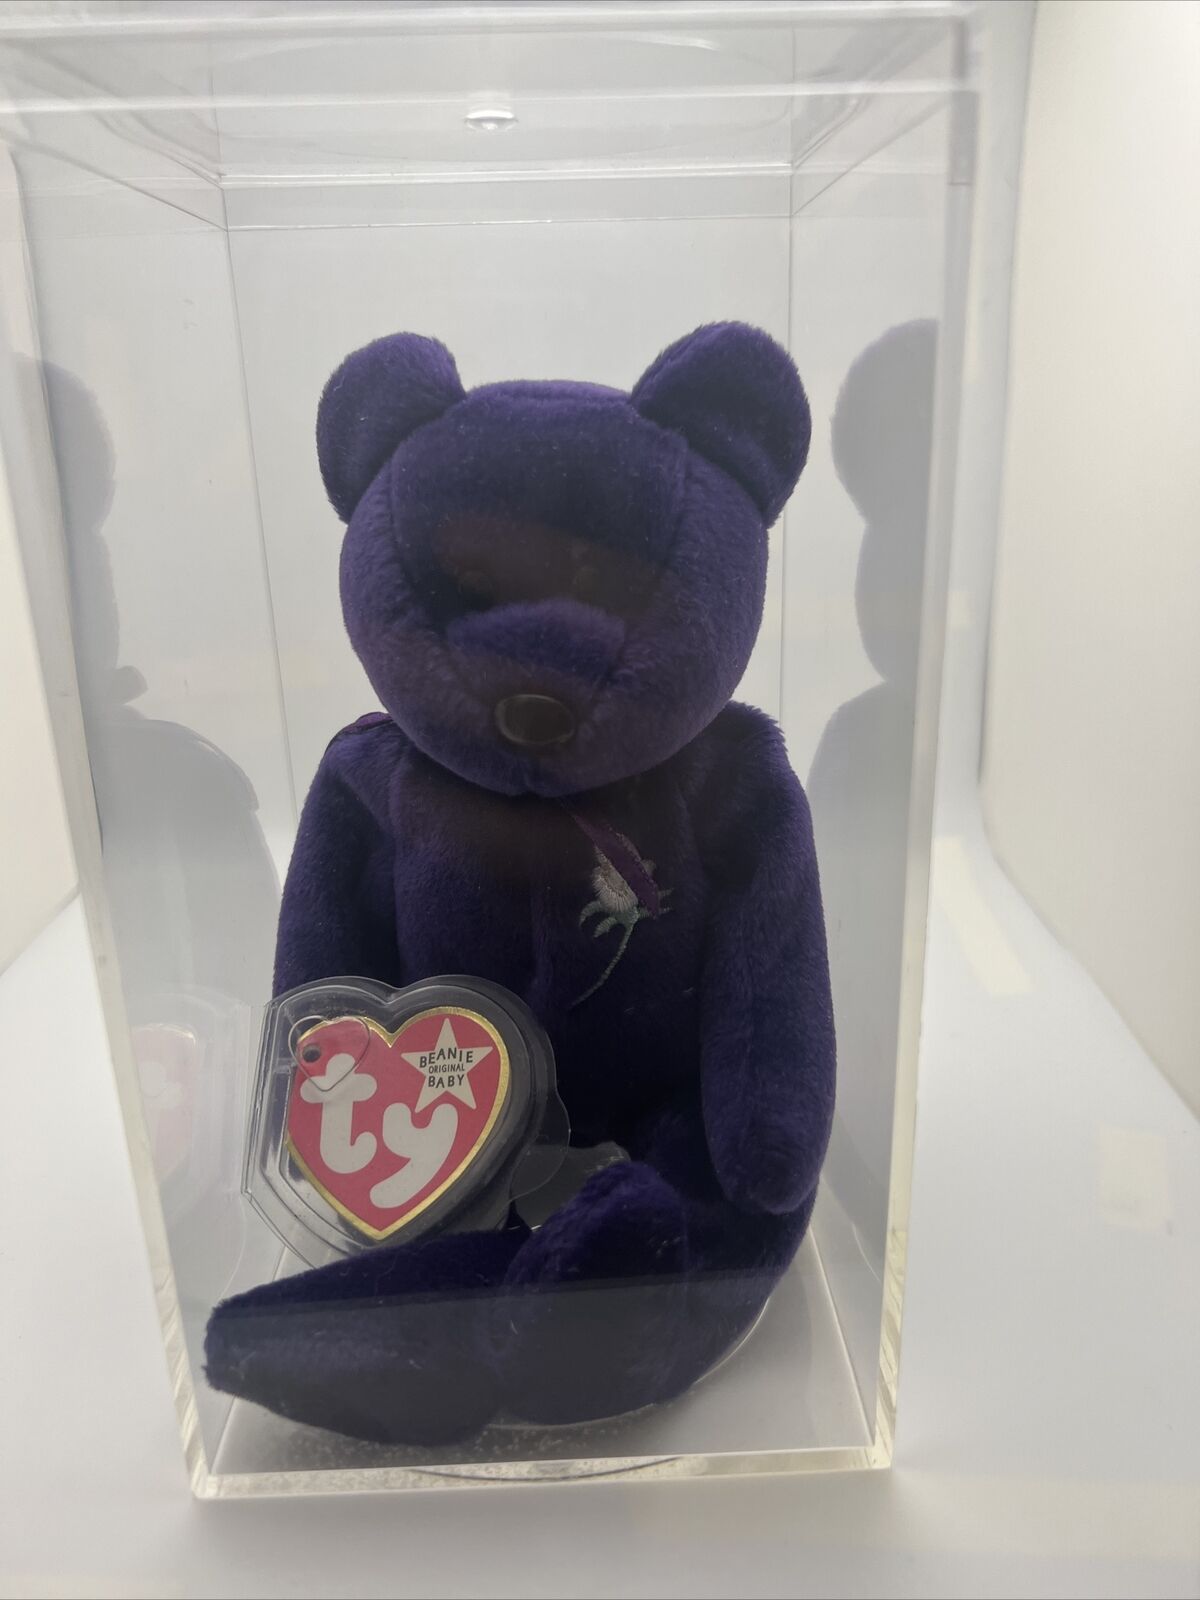 ❤️Rare 1st Edition Ty Princess Diana Beanie Baby with Tags NEAR MINT CONDITION